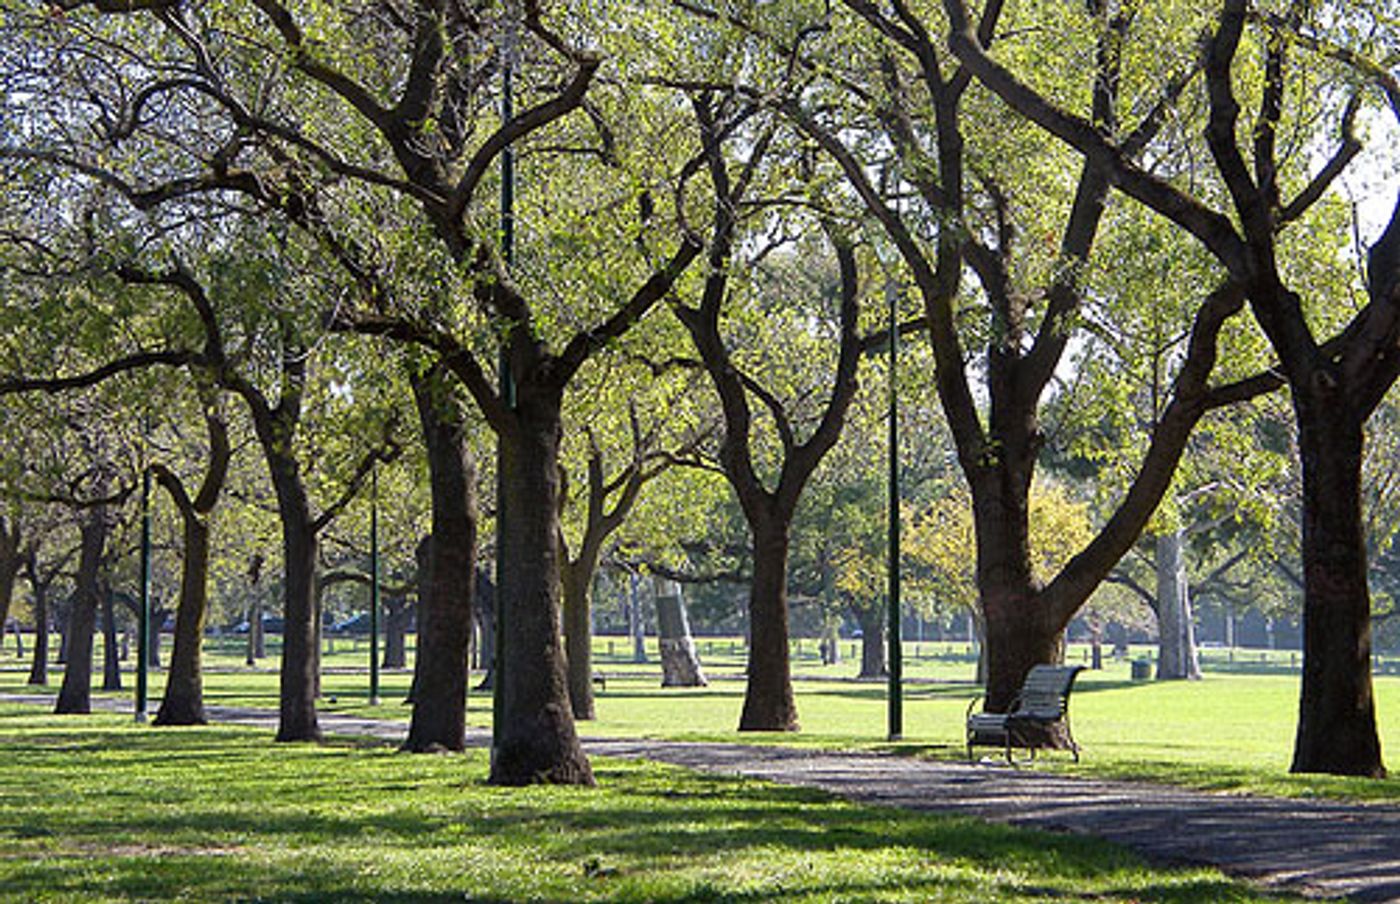 image of trees in Melbourne, credit: sourceable.net